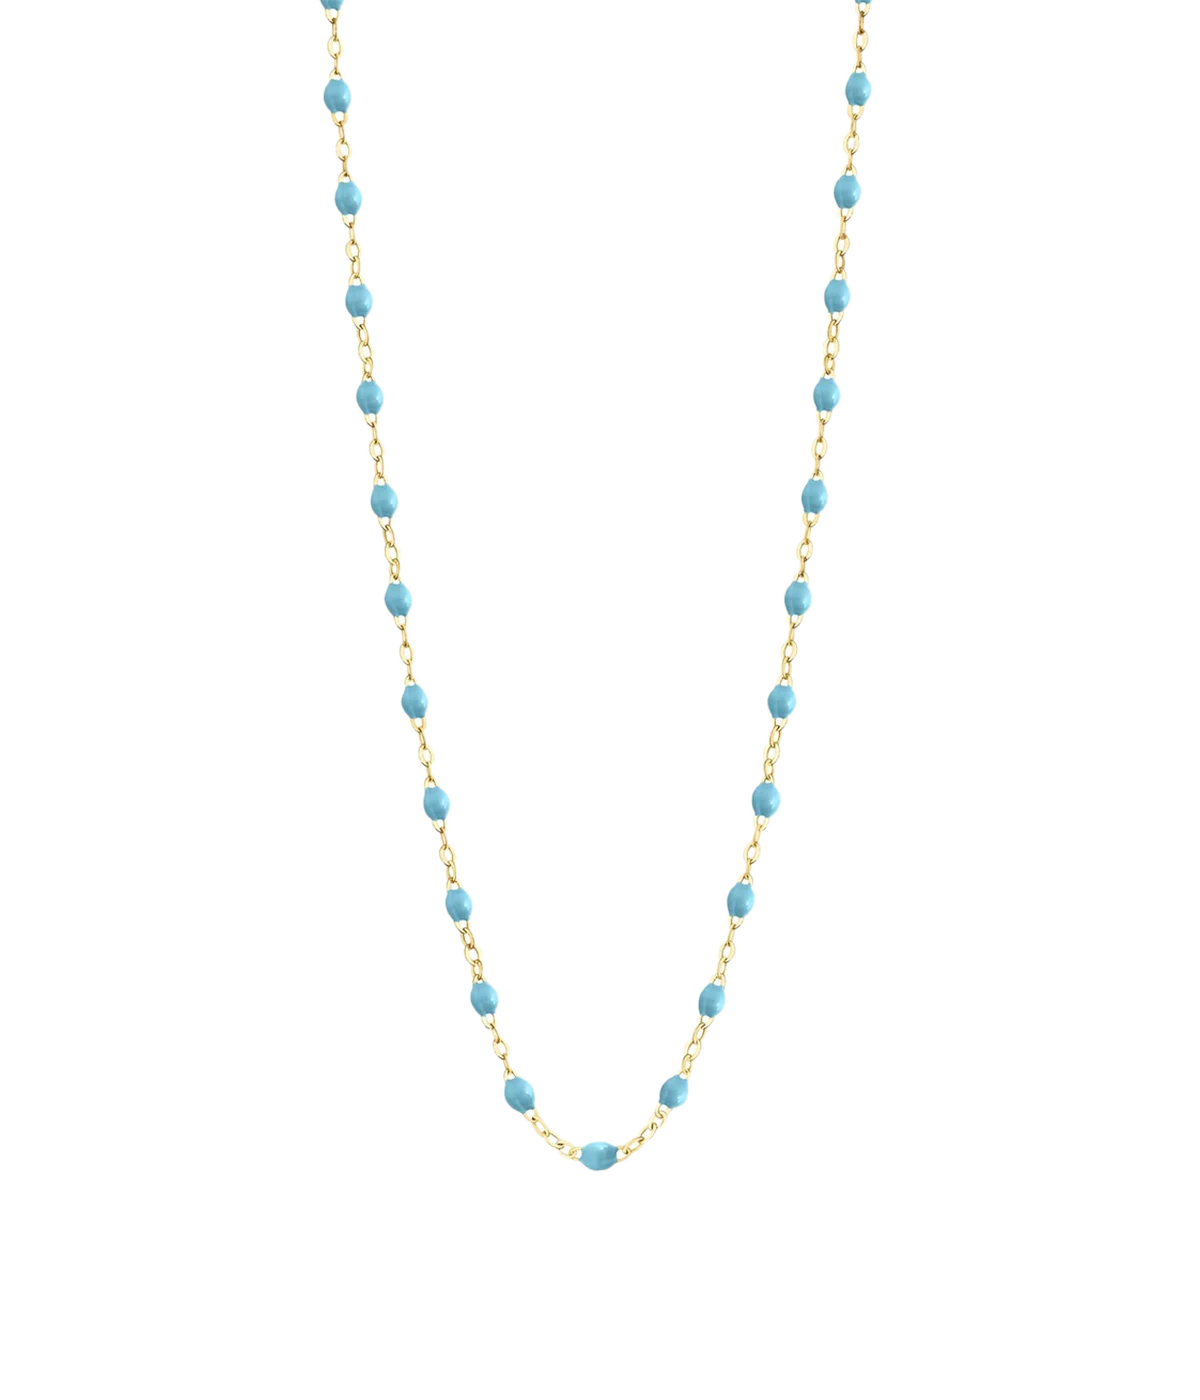 Classic Gigi 45cm Necklace in 18K Yellow Gold & Turquoise